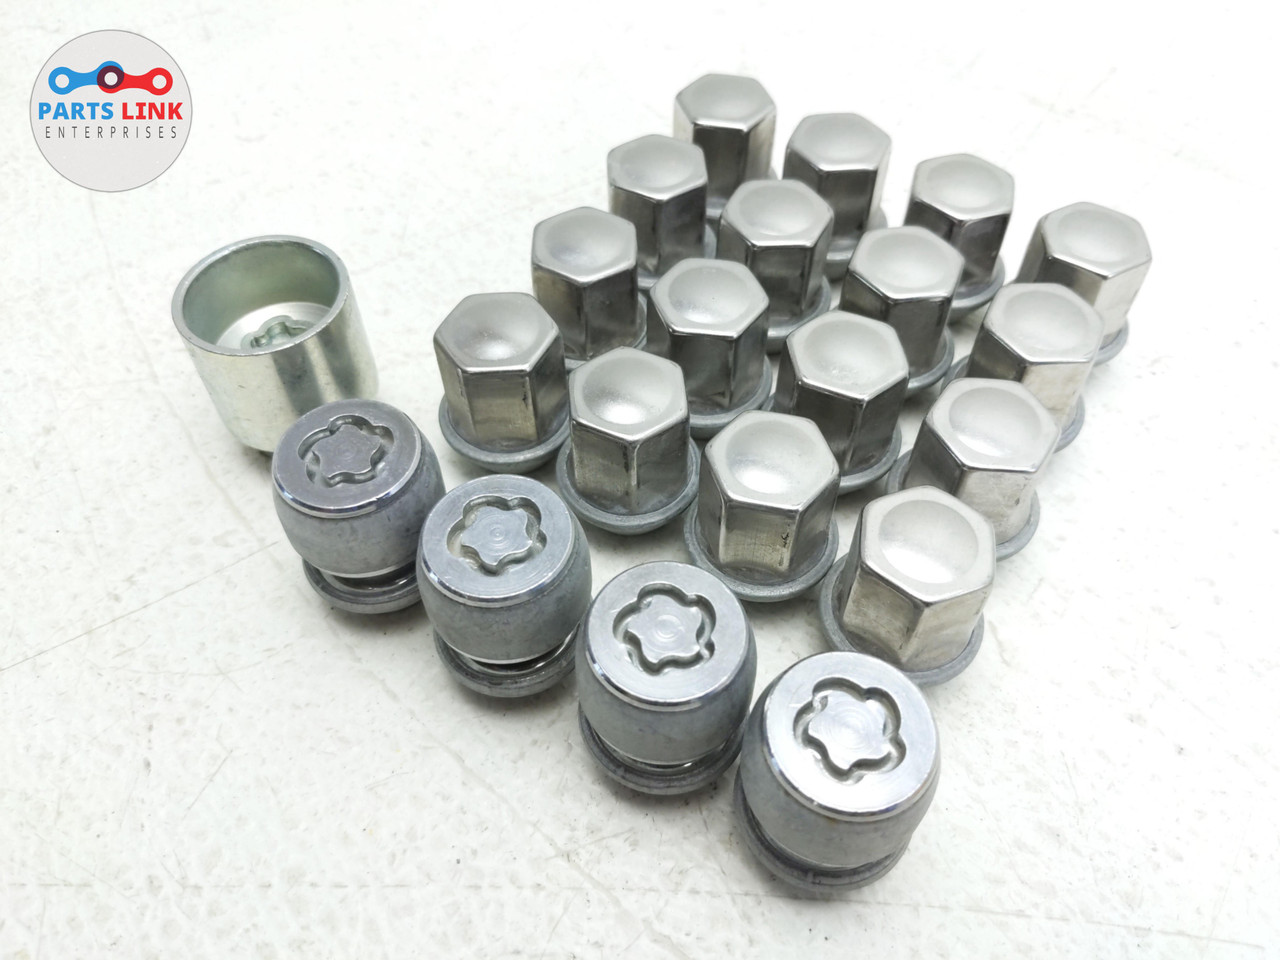 1 Piece Ford Transit Locking Wheel Nut Set for Alloy Wheels for 2000 Onwards